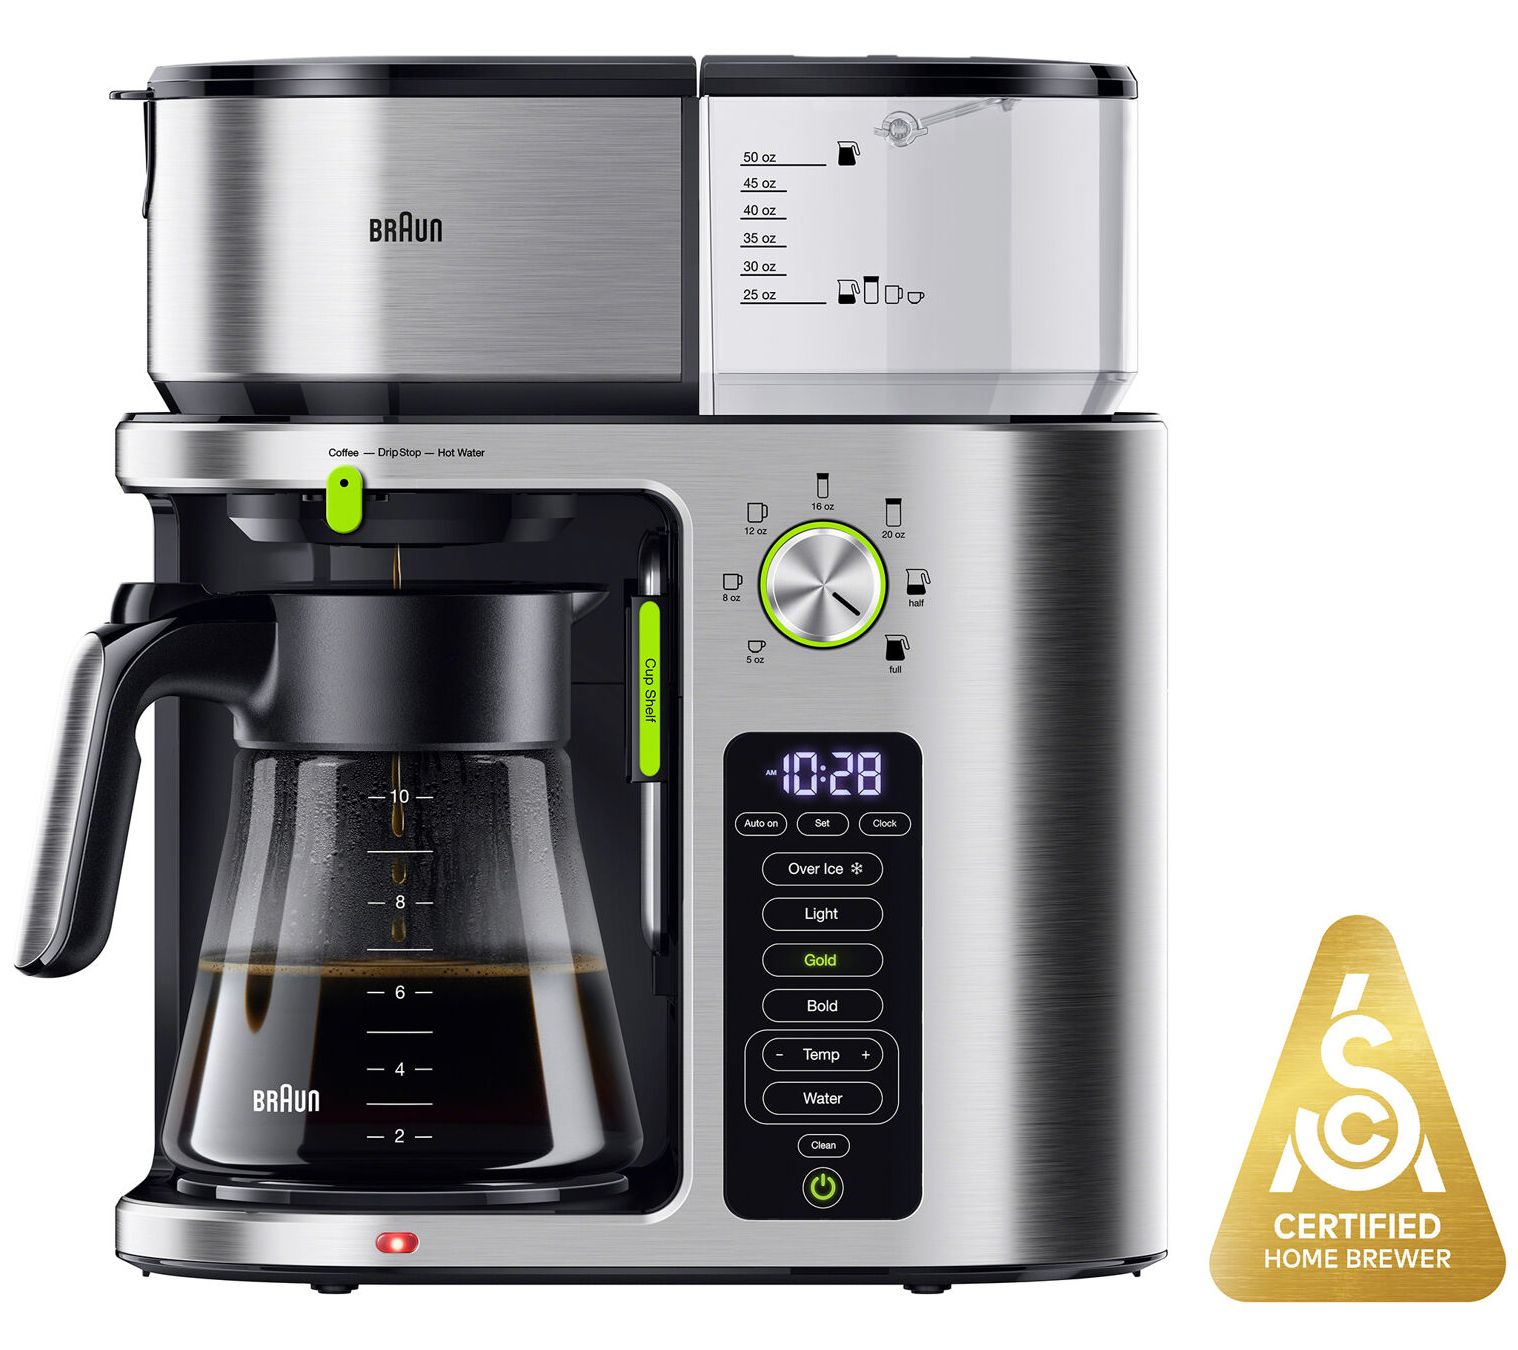 Braun MultiServe 10Cup SCA Certified Coffee Maker